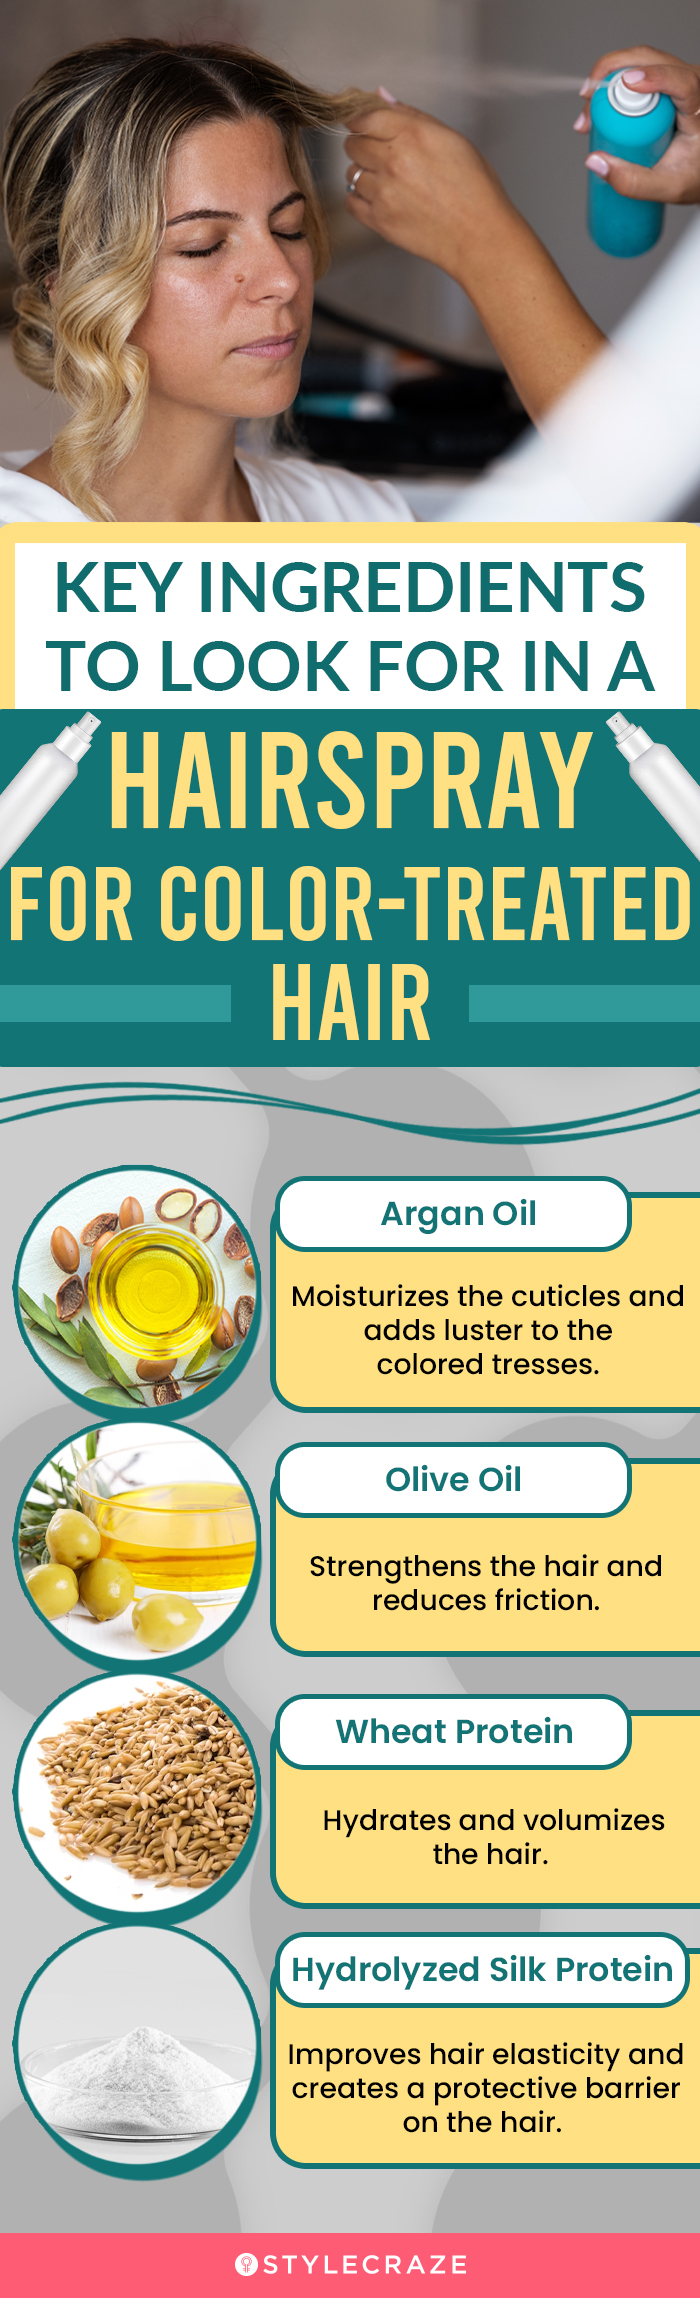 Ingredients To Look For In A Hairspray For Color-Treated Hair (infographic)